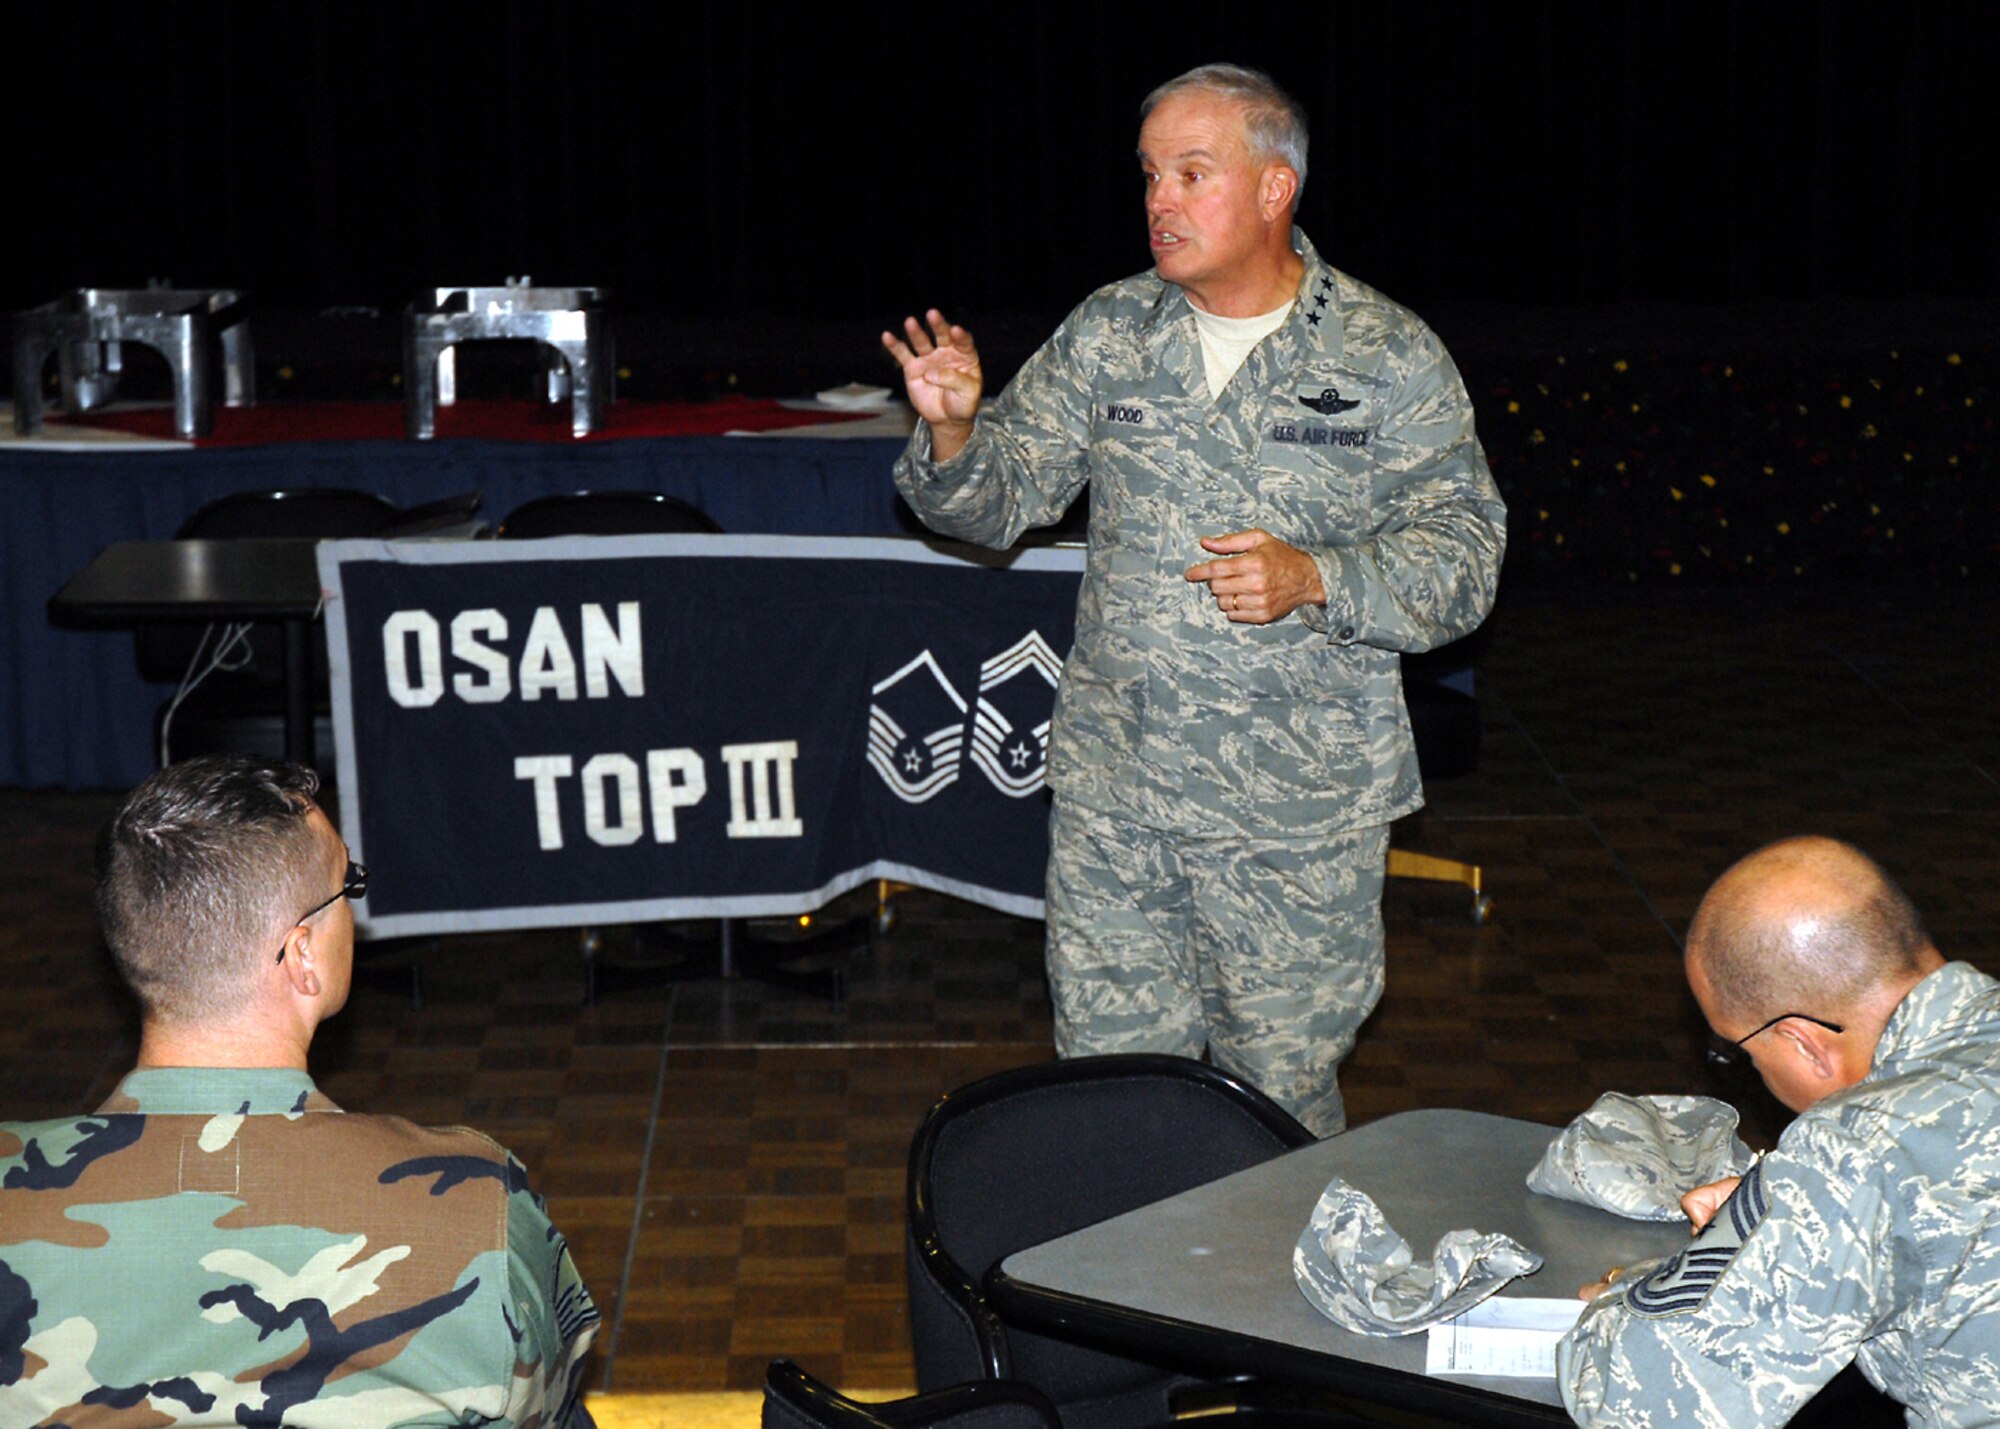 OSAN AIR BASE, Republic of Korea -- Lt. Gen. Stephen G. Wood Commander, Seventh Air Force, briefs current Air Force and pennisula issues to Osan's Top 3 membership.  General Wood also answered several questions concerning Airmen health, morale and welfare topics.  General Wood also explained his priorites for Seventh Air Force as mission accomplishment and improving quality of life programs for Airmen and their families.  He also stressed to everyone to be an active wingman and focusing on winter safety during the upcoming holiday season.  (U.S. Air Force photo by Senior Master Sgt. Marvin Krause)